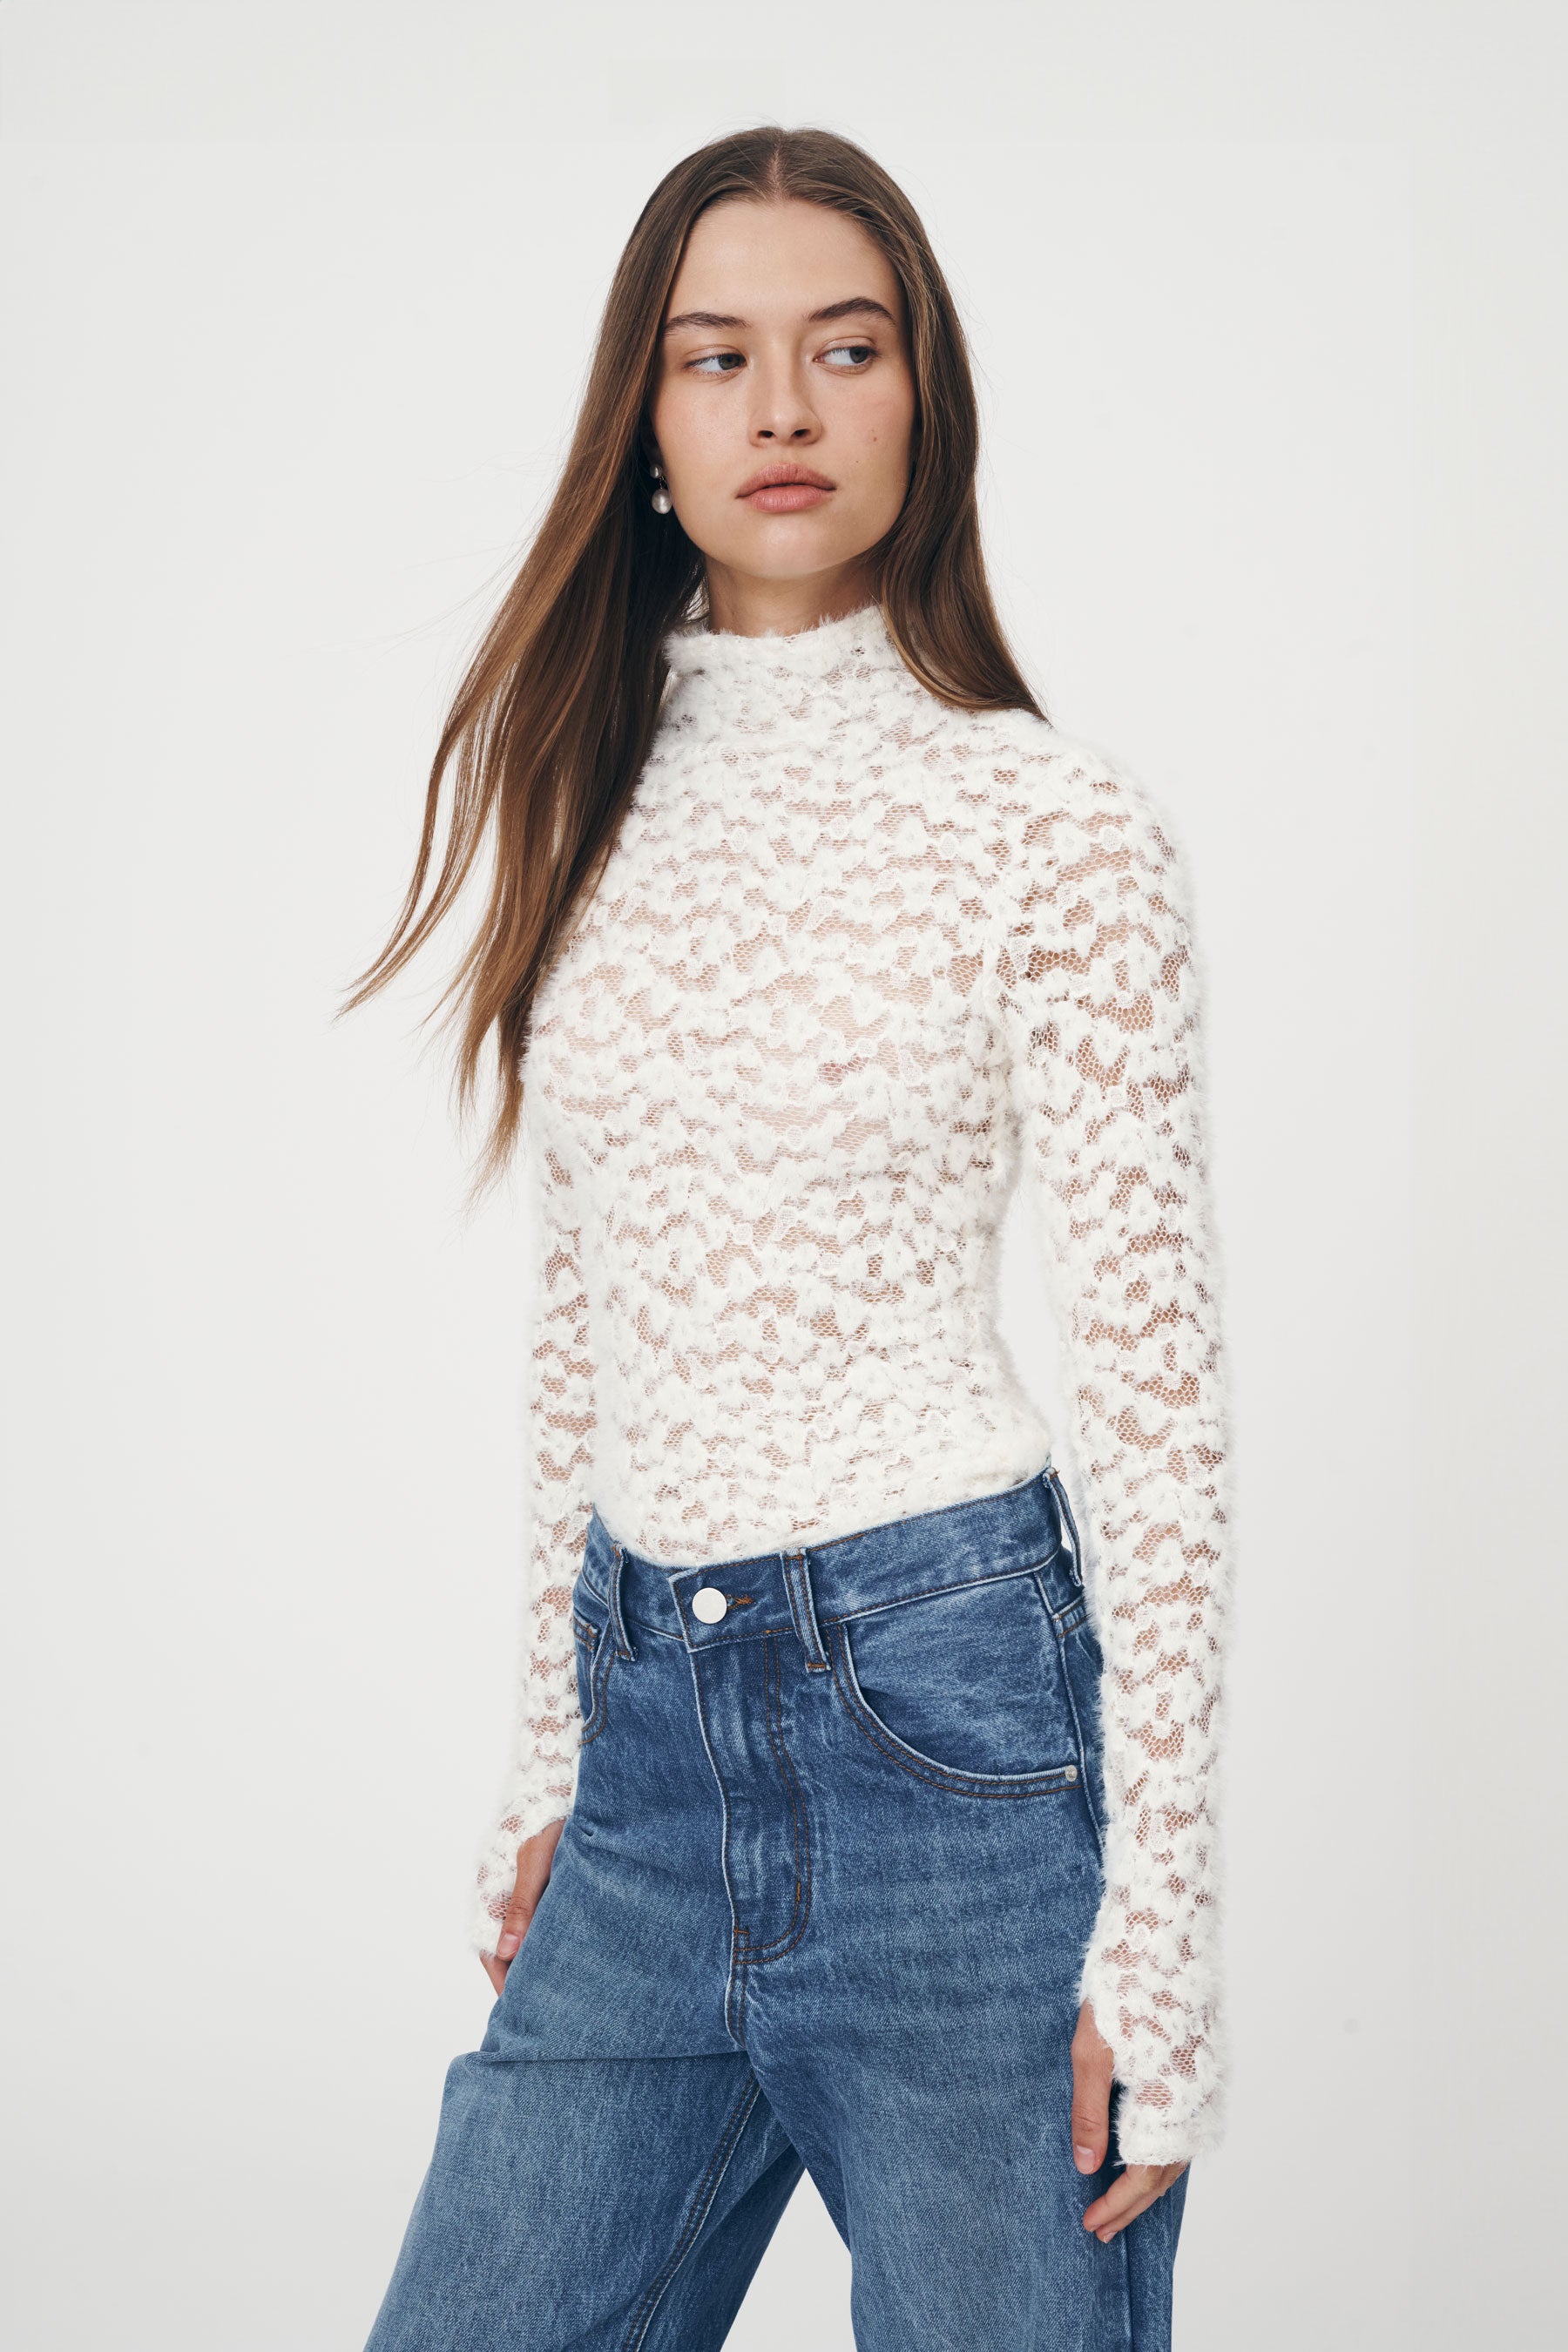 Galo Fuzzy Lace Top // Creme